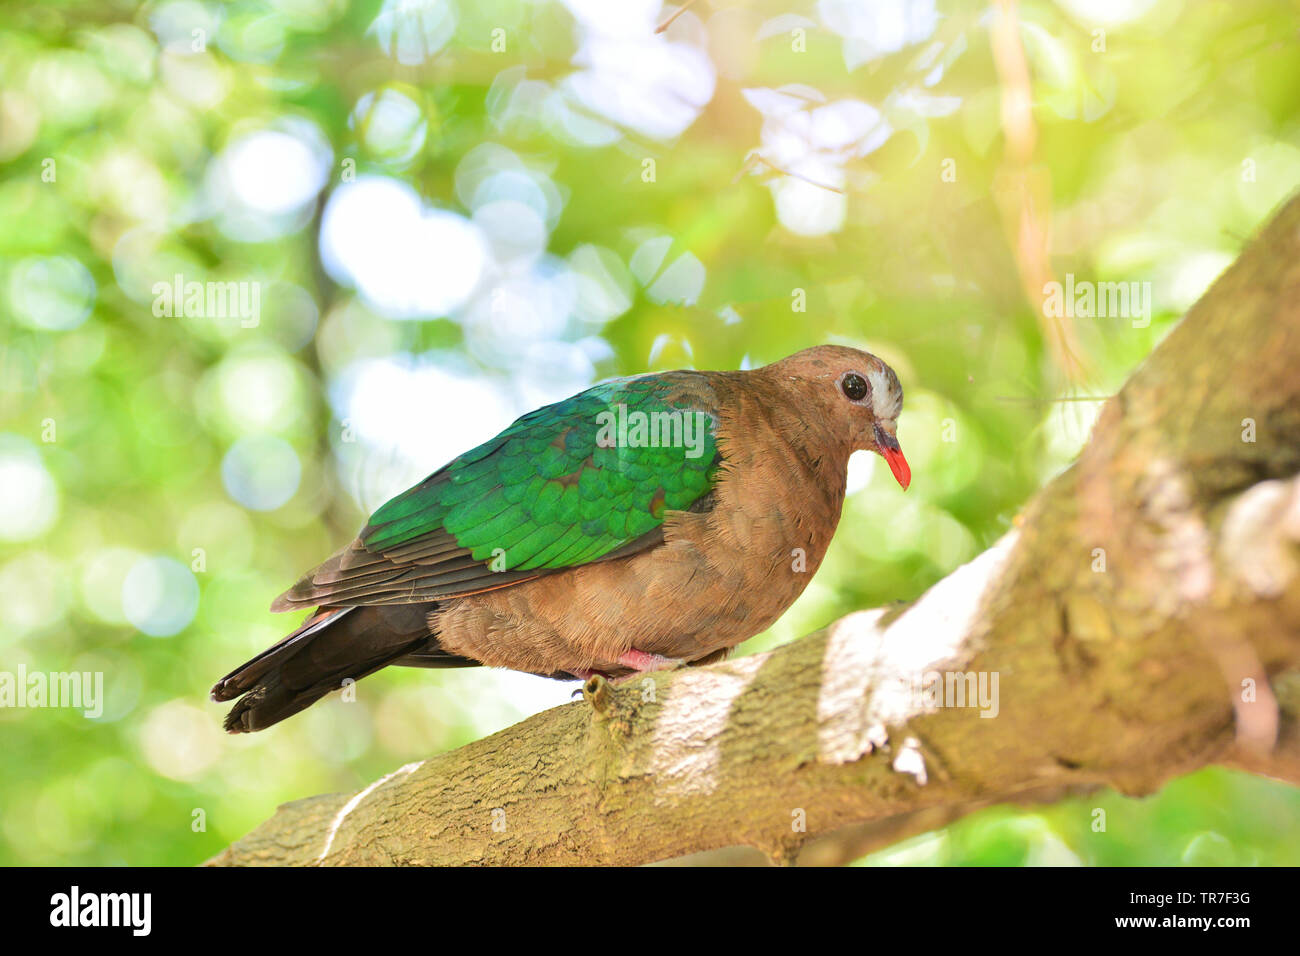 Common asian emerald bird dove green wing sitting on branch tree nature Stock Photo